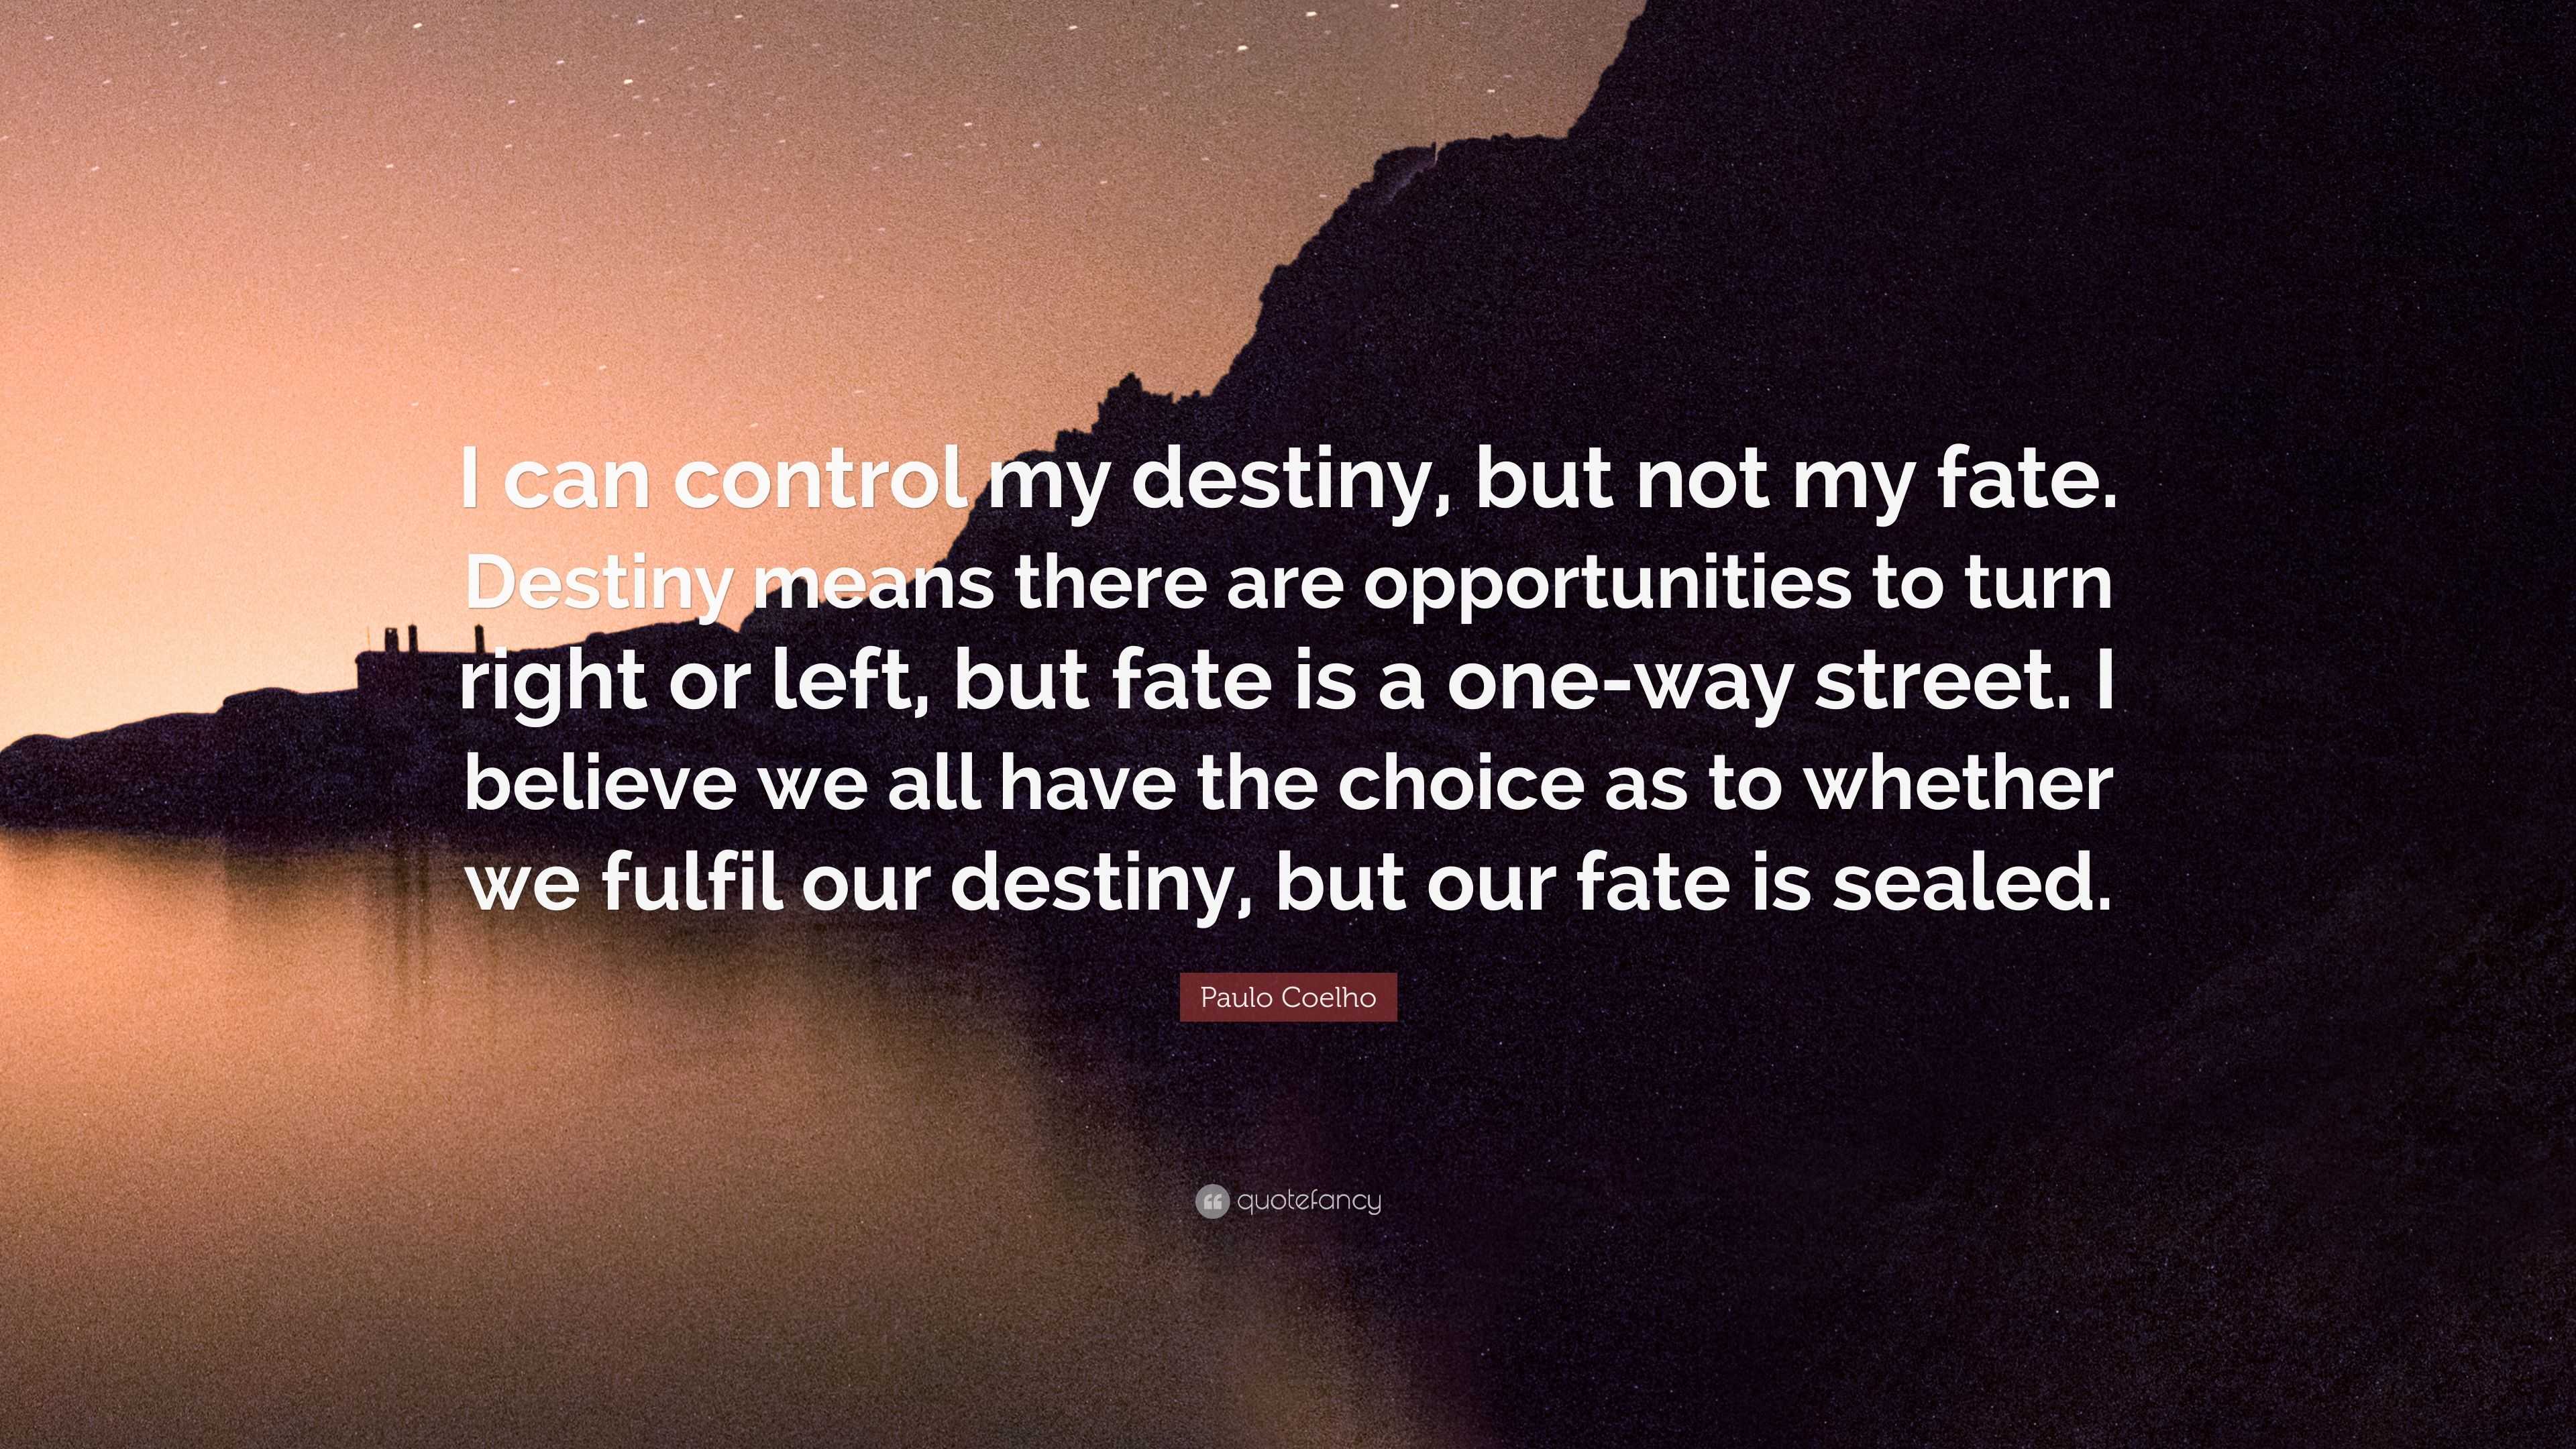 Paulo Coelho Quote “I can control my destiny, but not my